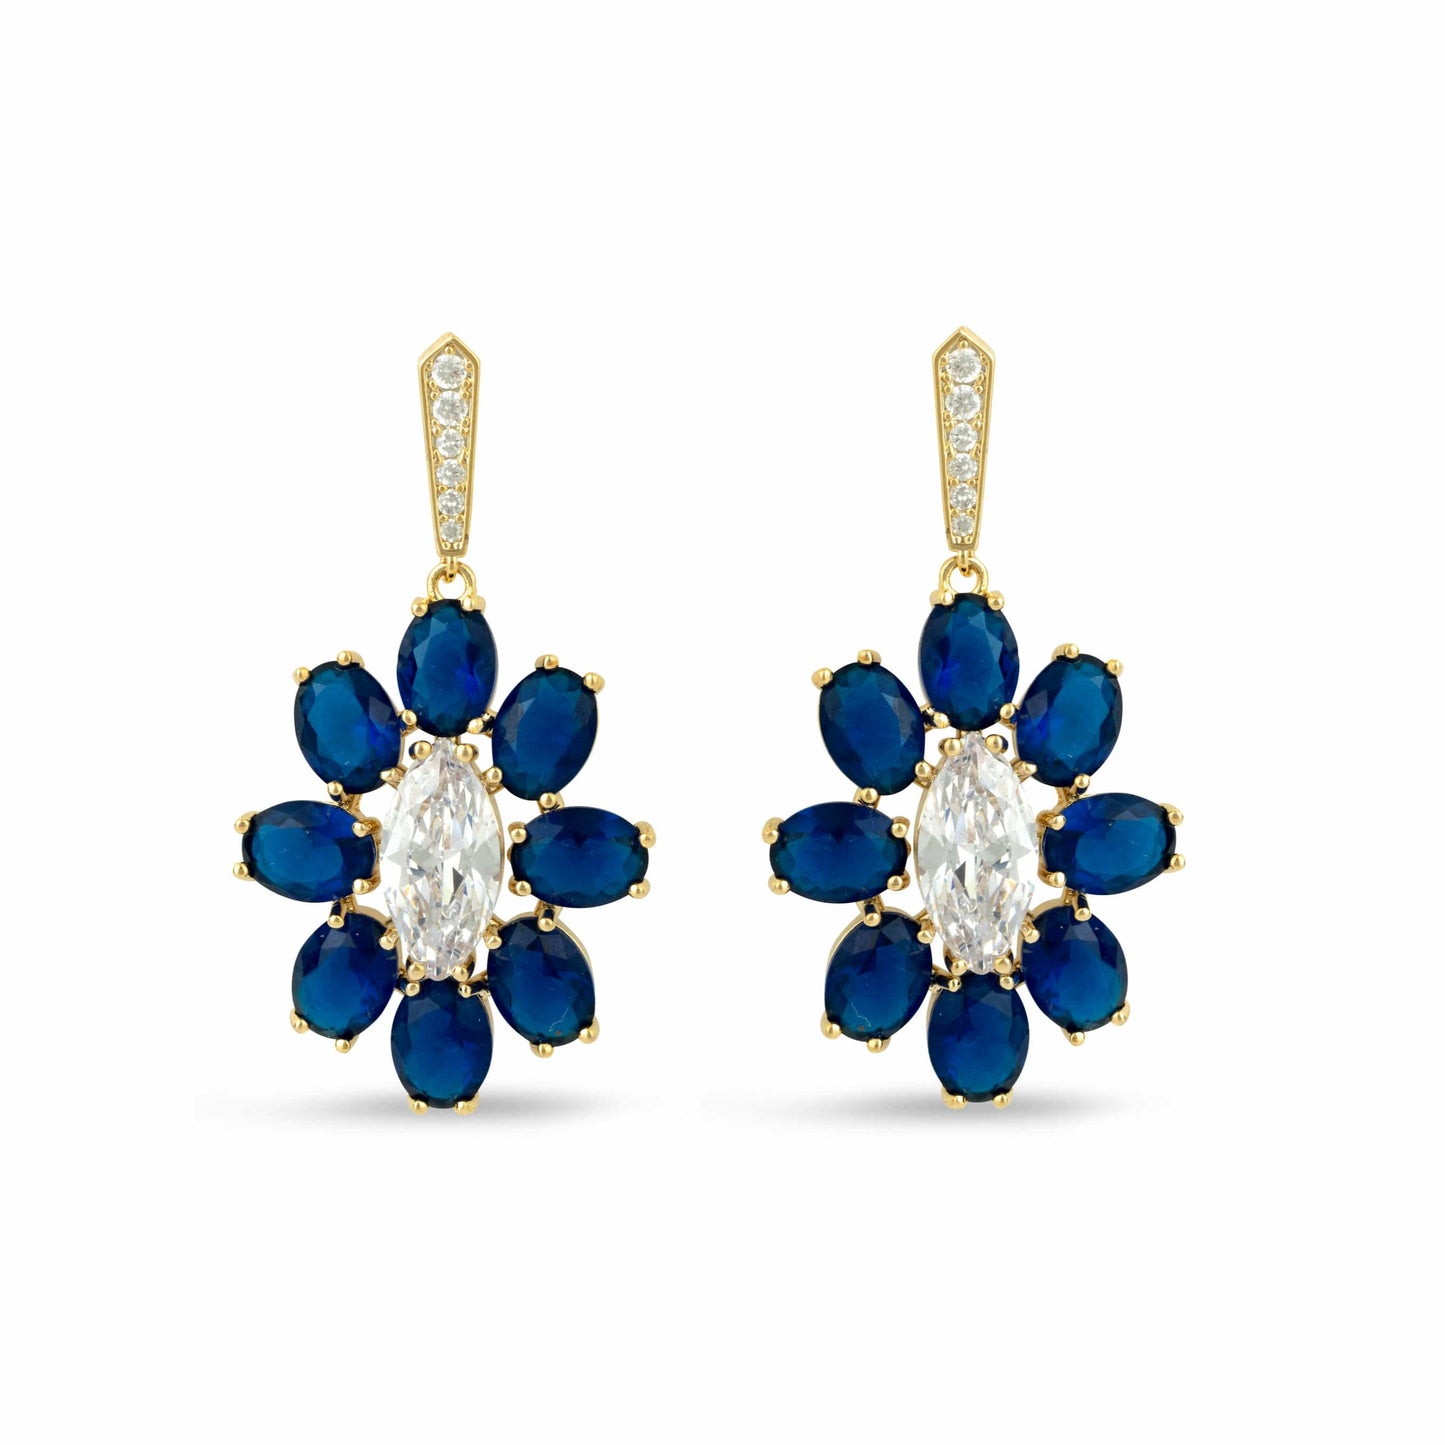 Gold Daisy Drop Earrings with Blue and Clear Crystals - Love & Lilly Jewellery